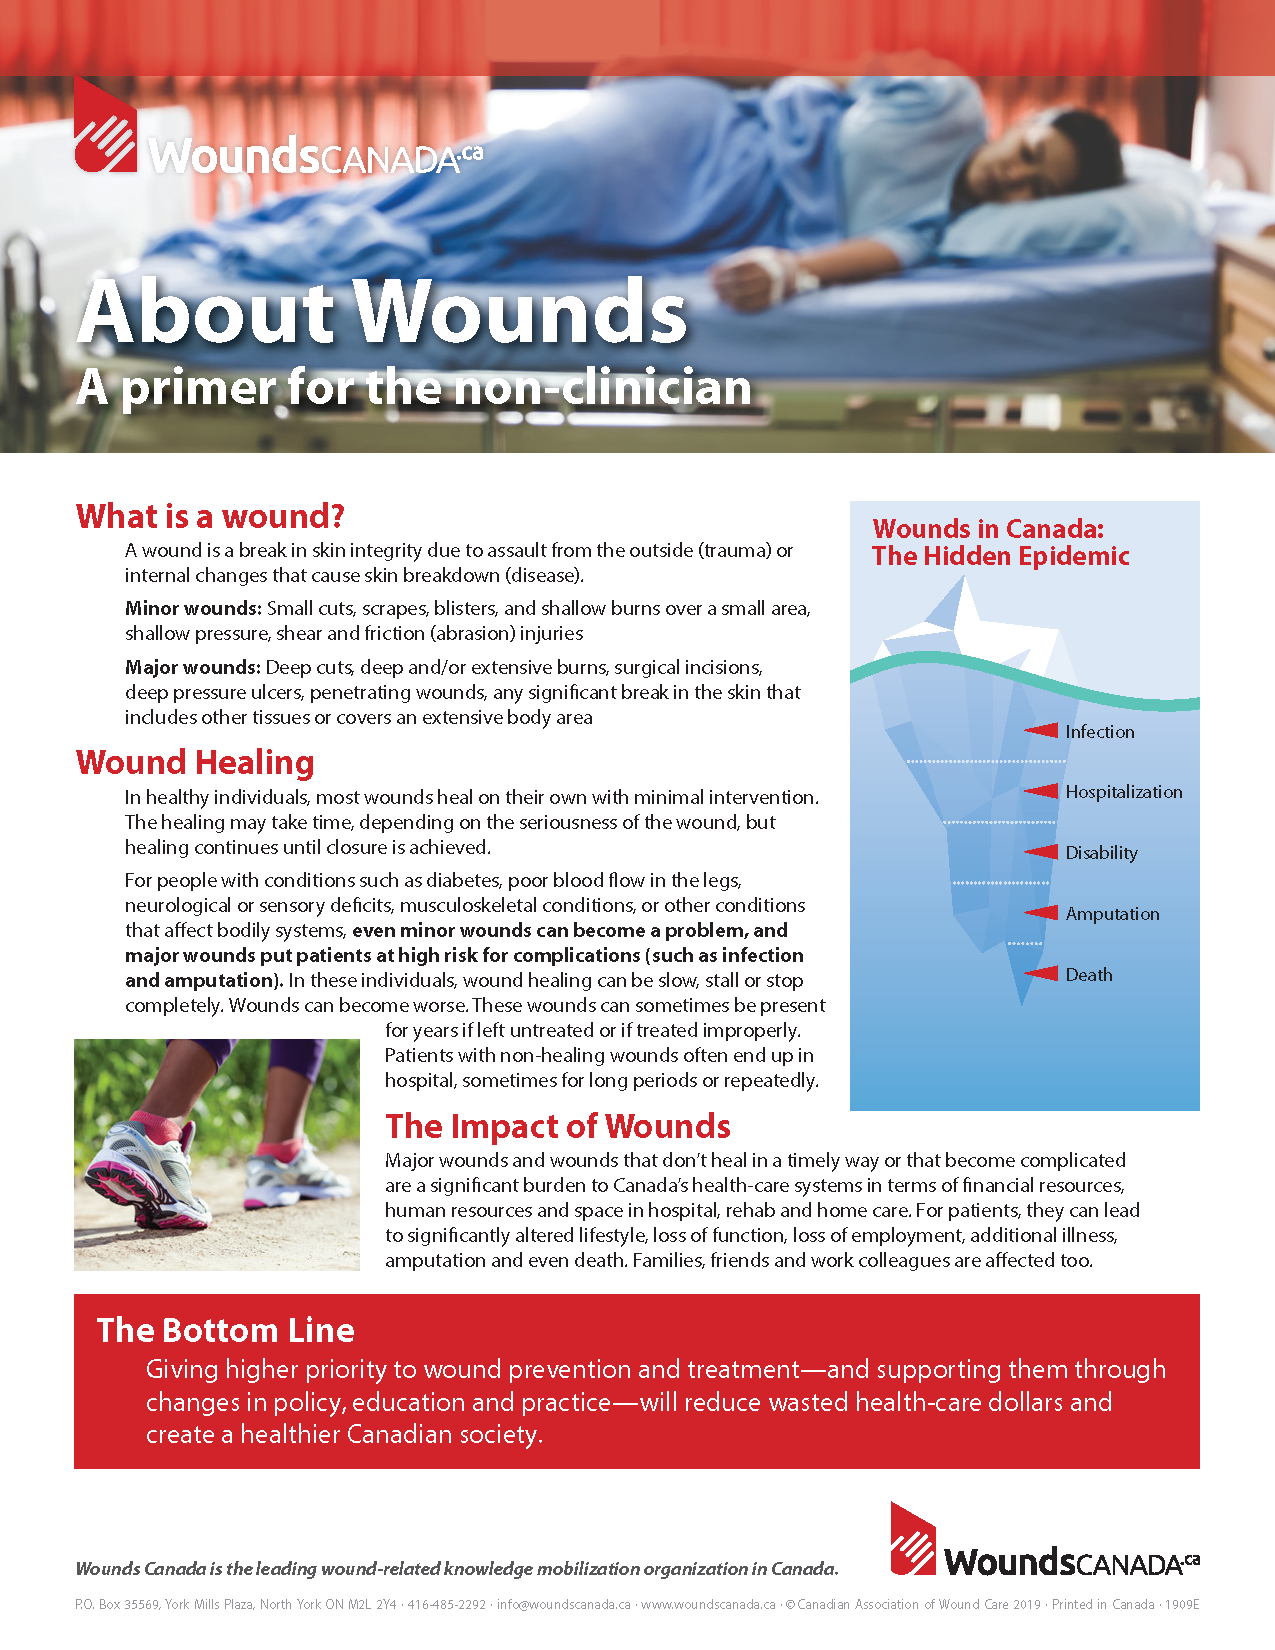 About Wounds: A primer for the non-clinician